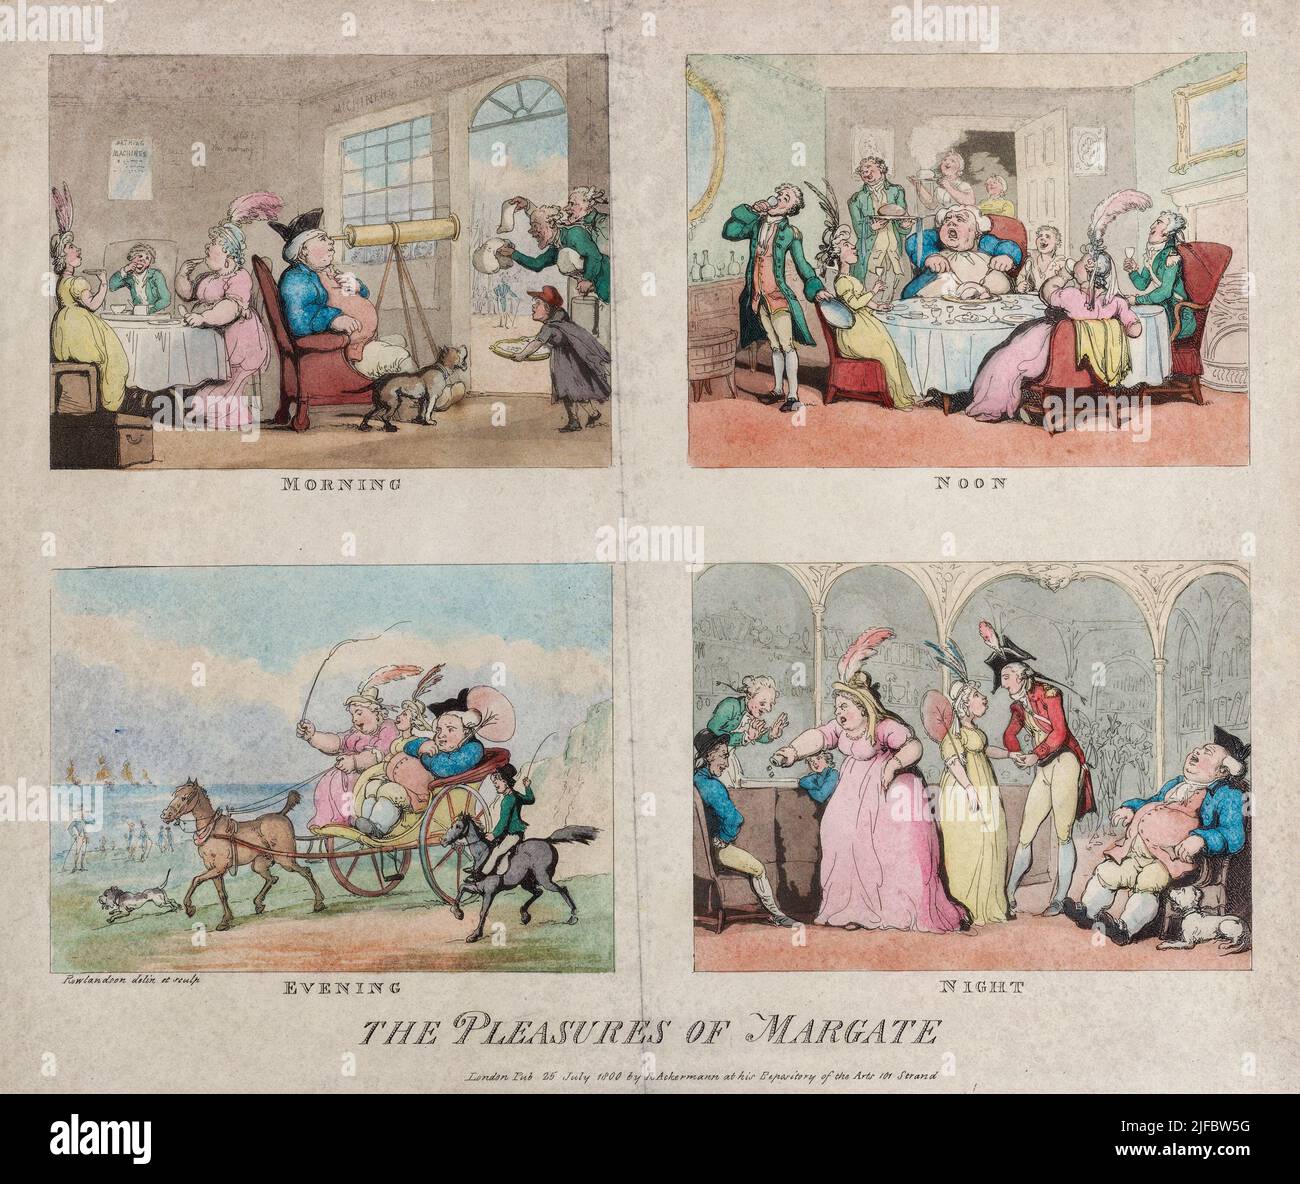 The Pleasures of Margate, July 25, 1800 Artist: Thomas Rowlandson (1756-1827) an English artist and caricaturist of the Georgian Era. A social observer, he was a prolific artist and print maker.  Credit: Thomas Rowlandson/Alamy Stock Photo